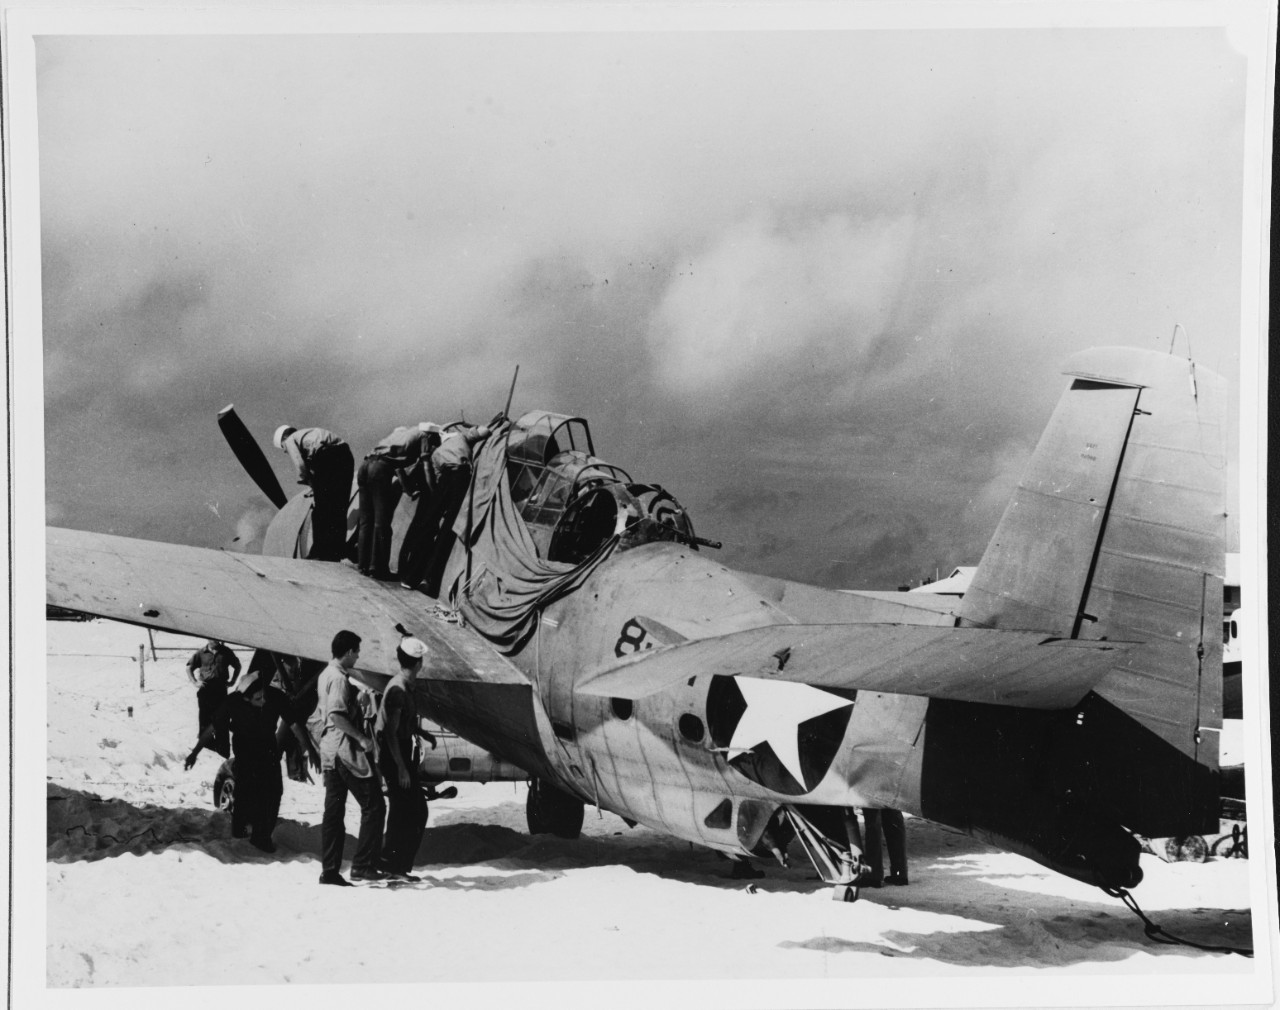 Photo #: 80-G-17063  Battle of Midway, June 1942